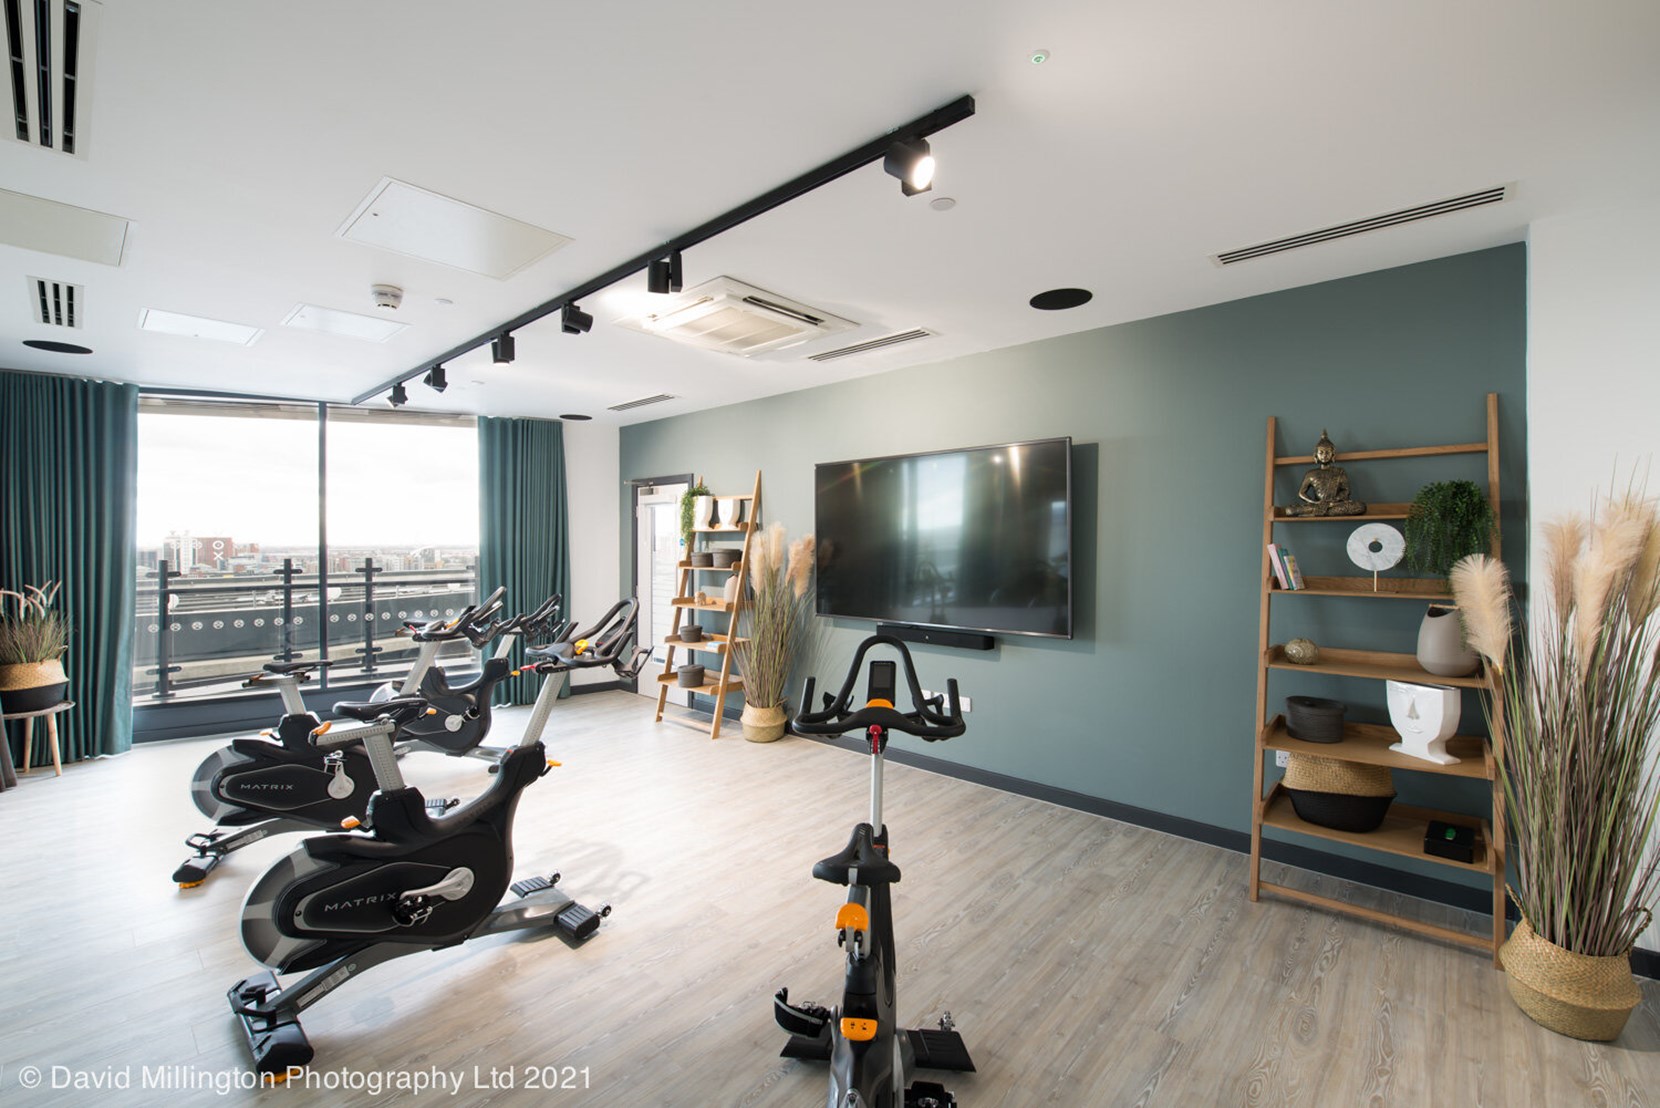 Apartments to Rent by Allsop at Vox, Manchester, M15, gym spinning room